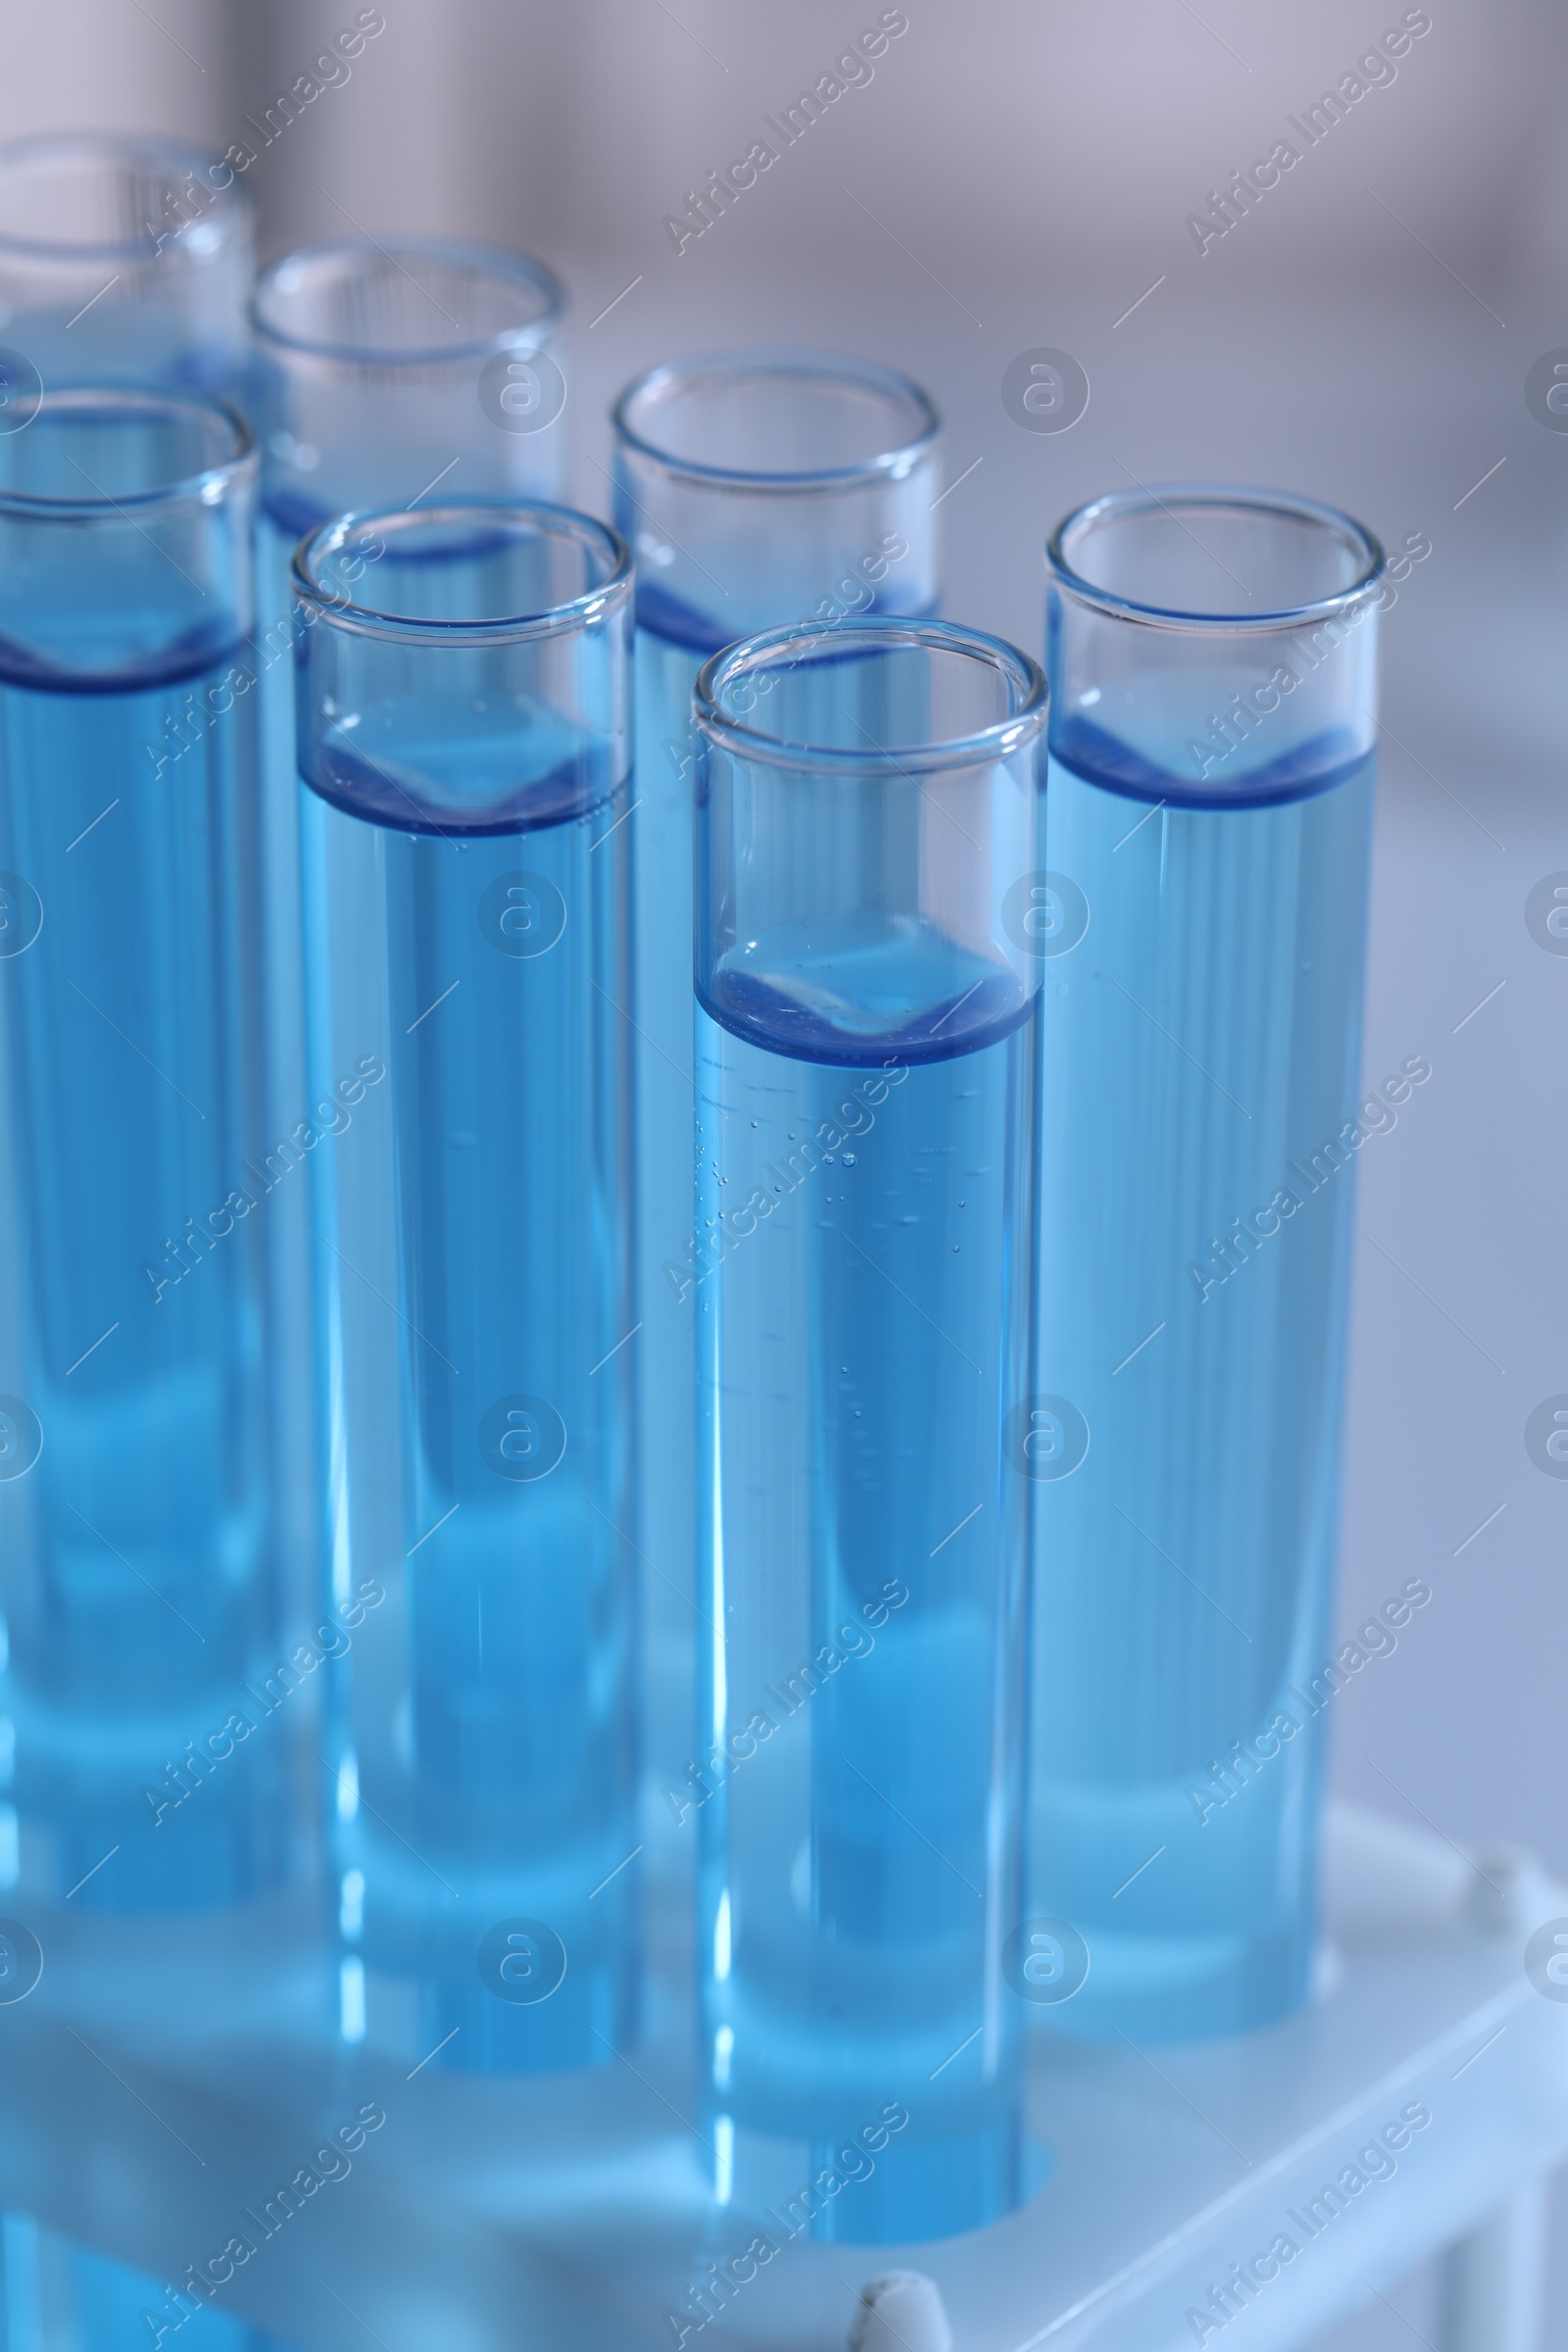 Photo of Test tubes with reagents in rack against blurred background, closeup. Laboratory analysis